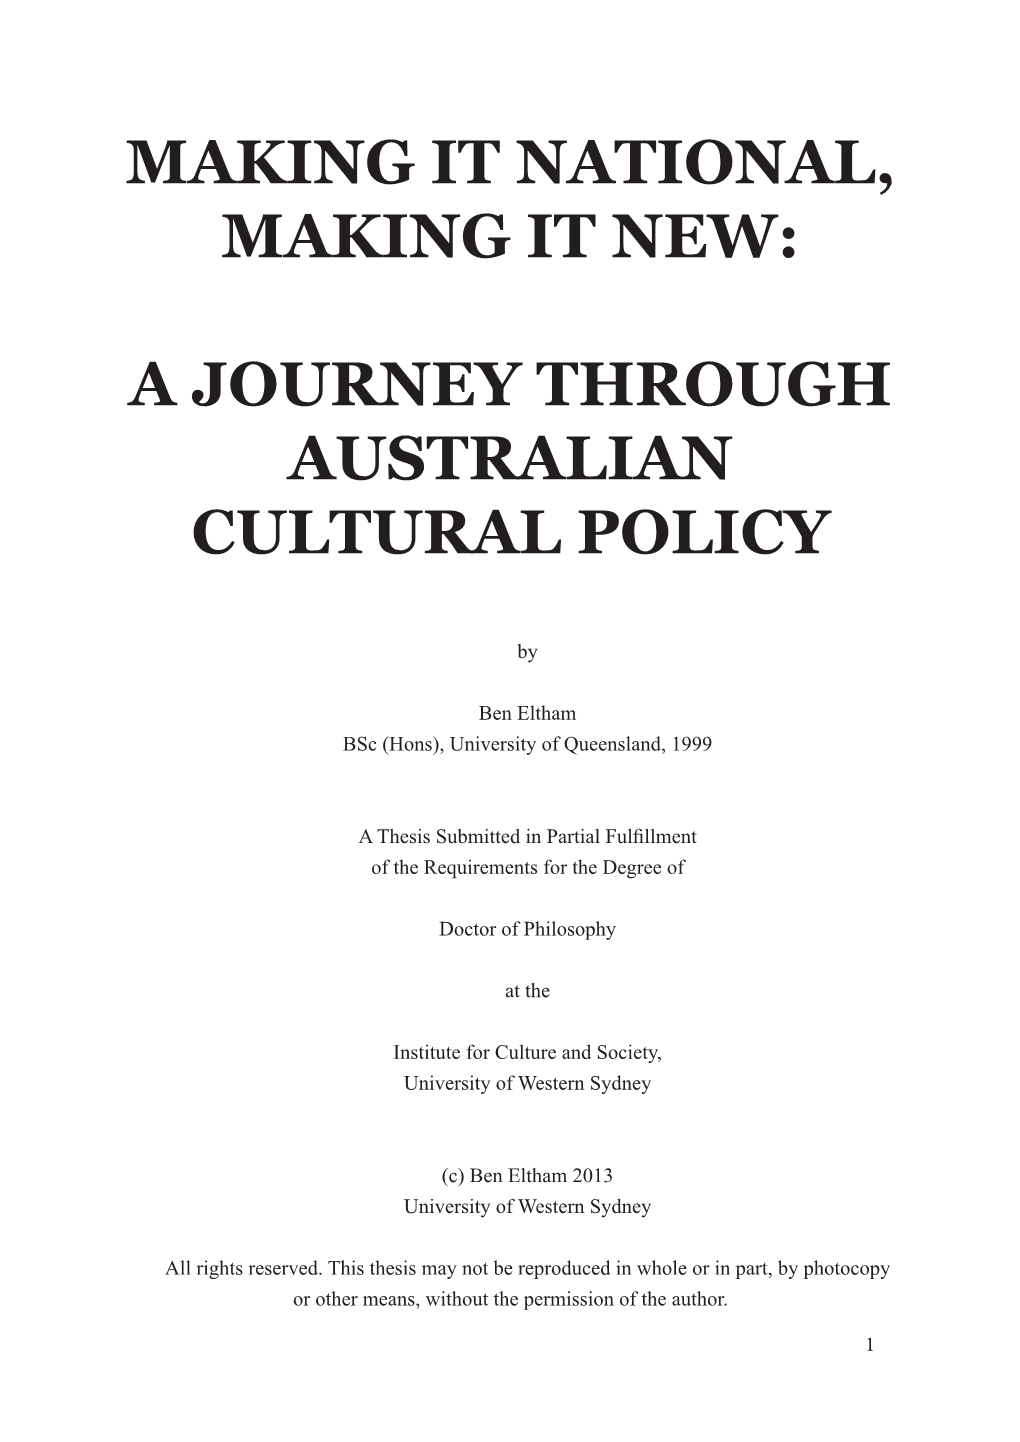 A Journey Through Australian Cultural Policy